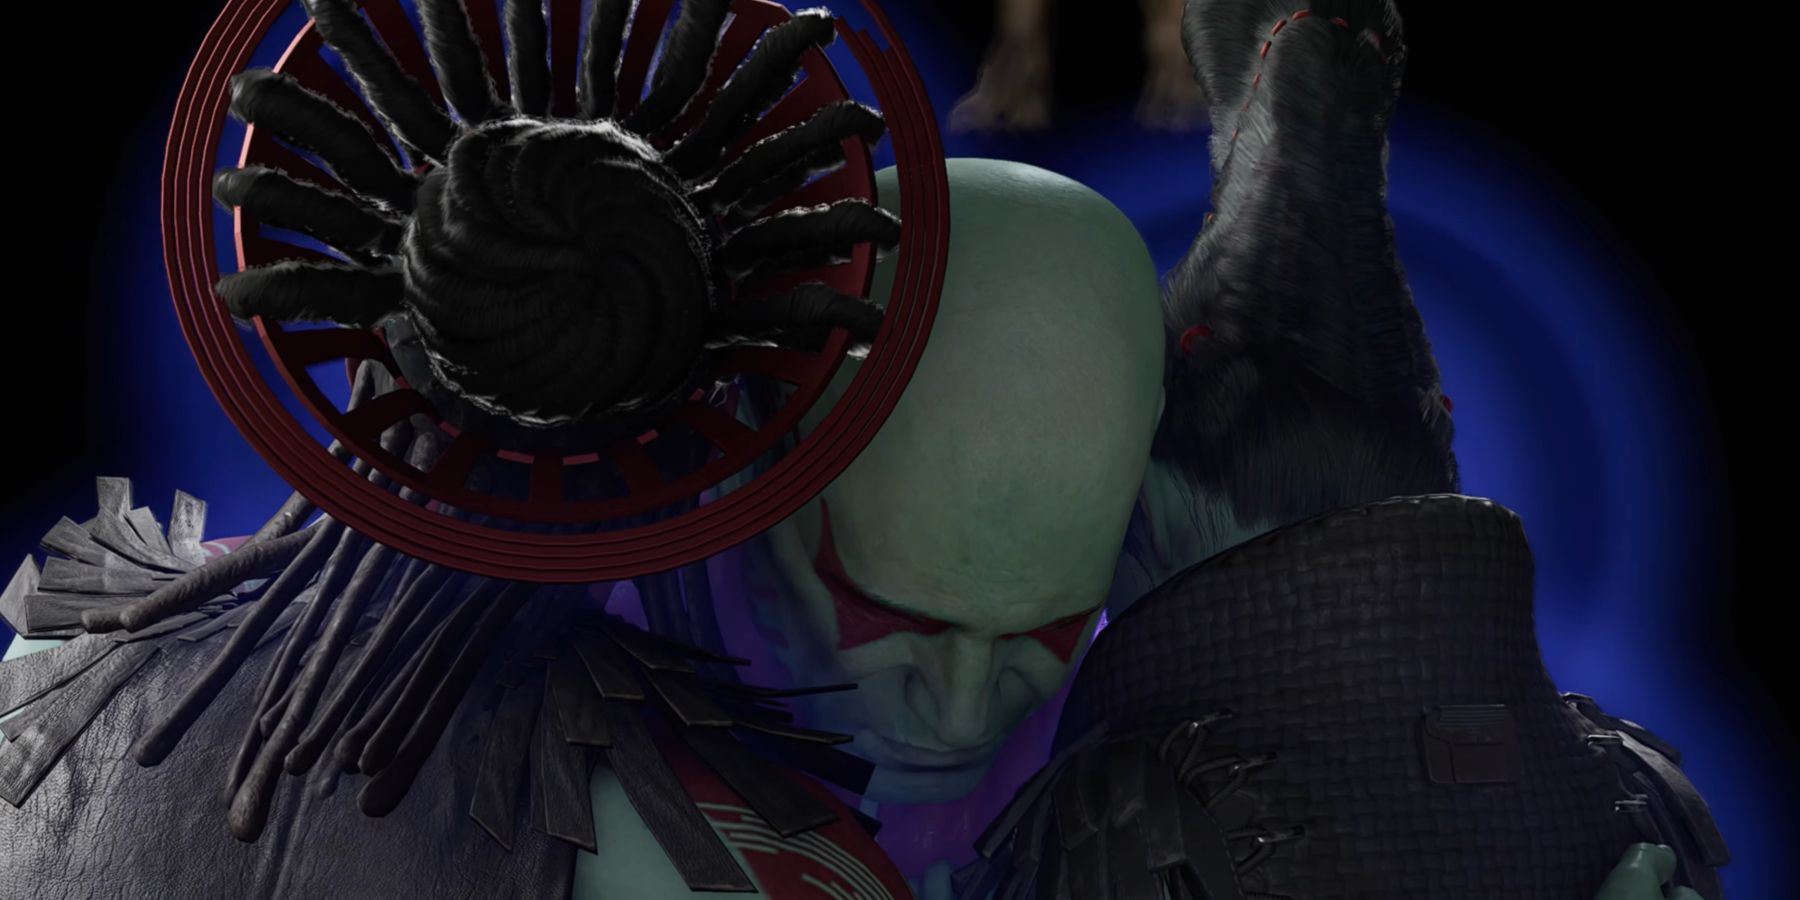 Drax embracing while stabbing his wife and daughter in Marvel's Guardians Of The Galaxy